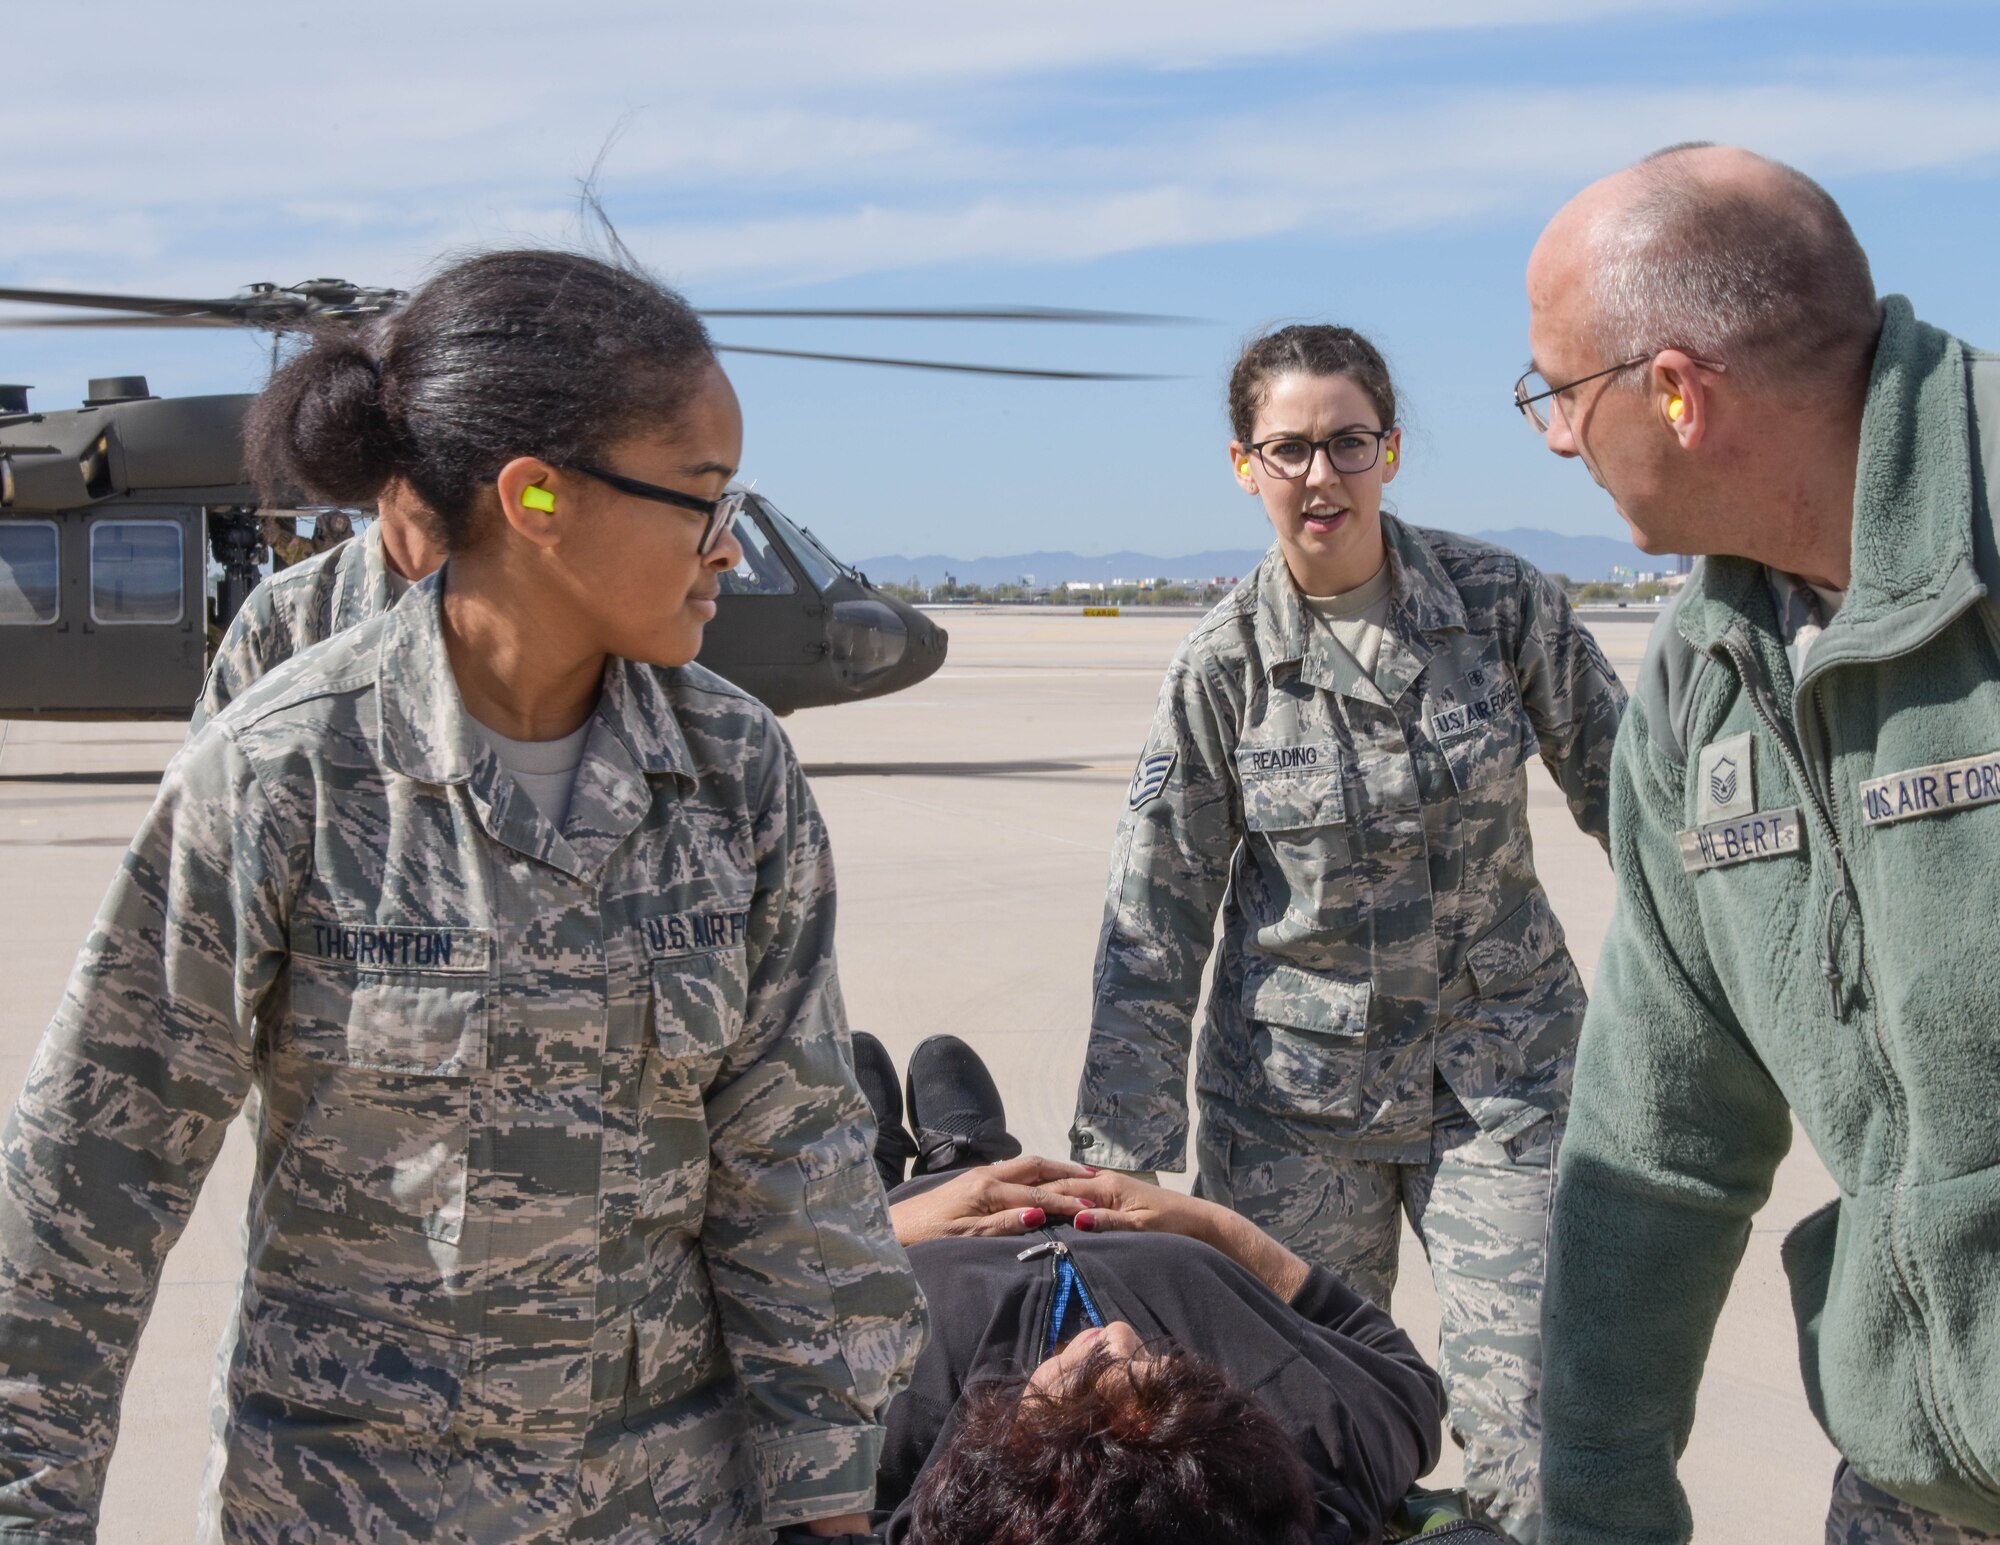 Nurses, pharmacy technicians and flight doctors were among the squadron members who participated in the National Disaster Medical System training exercise.